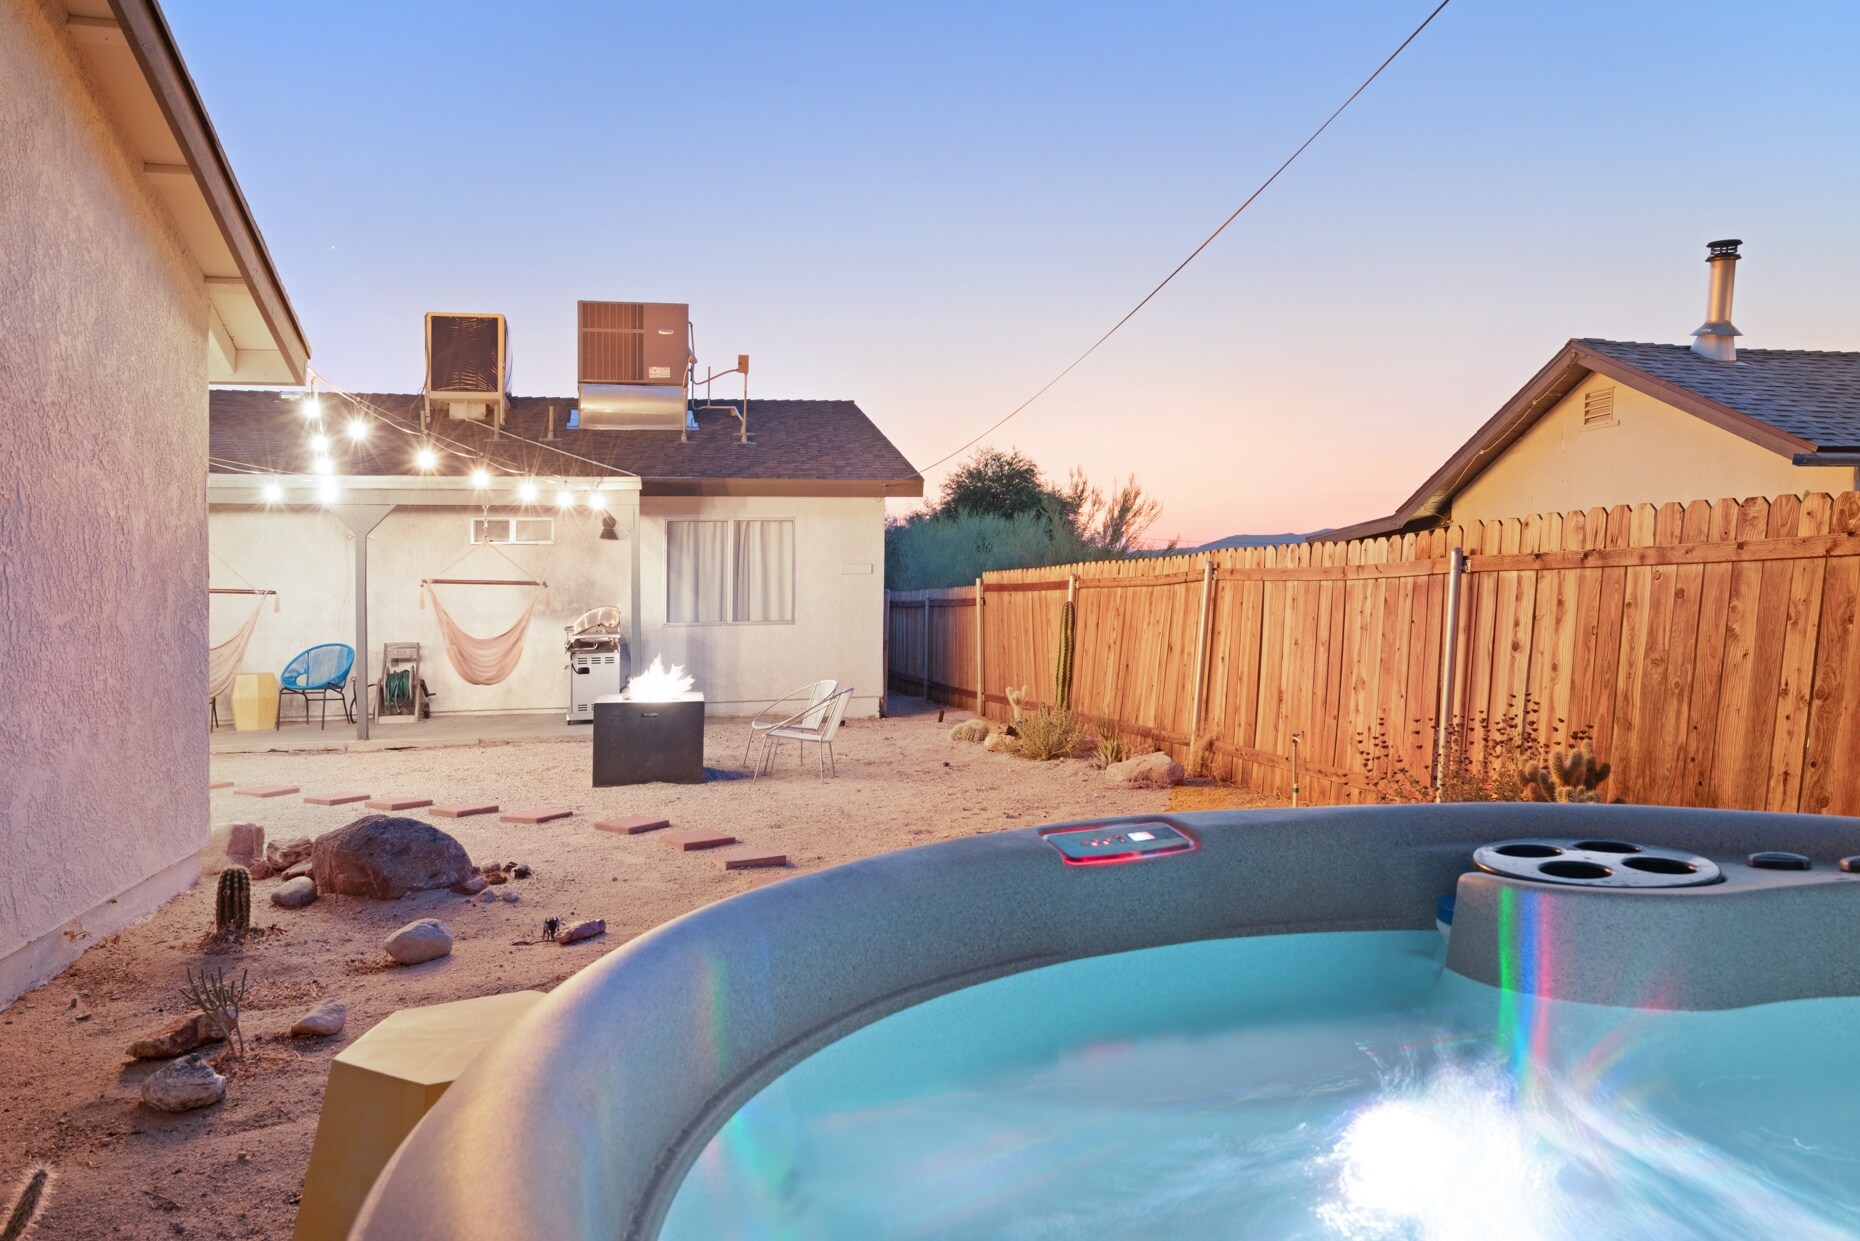 Property Image 2 - The RockHopper - Hot Tub, Fire Pit & Walk to Downtown JT!